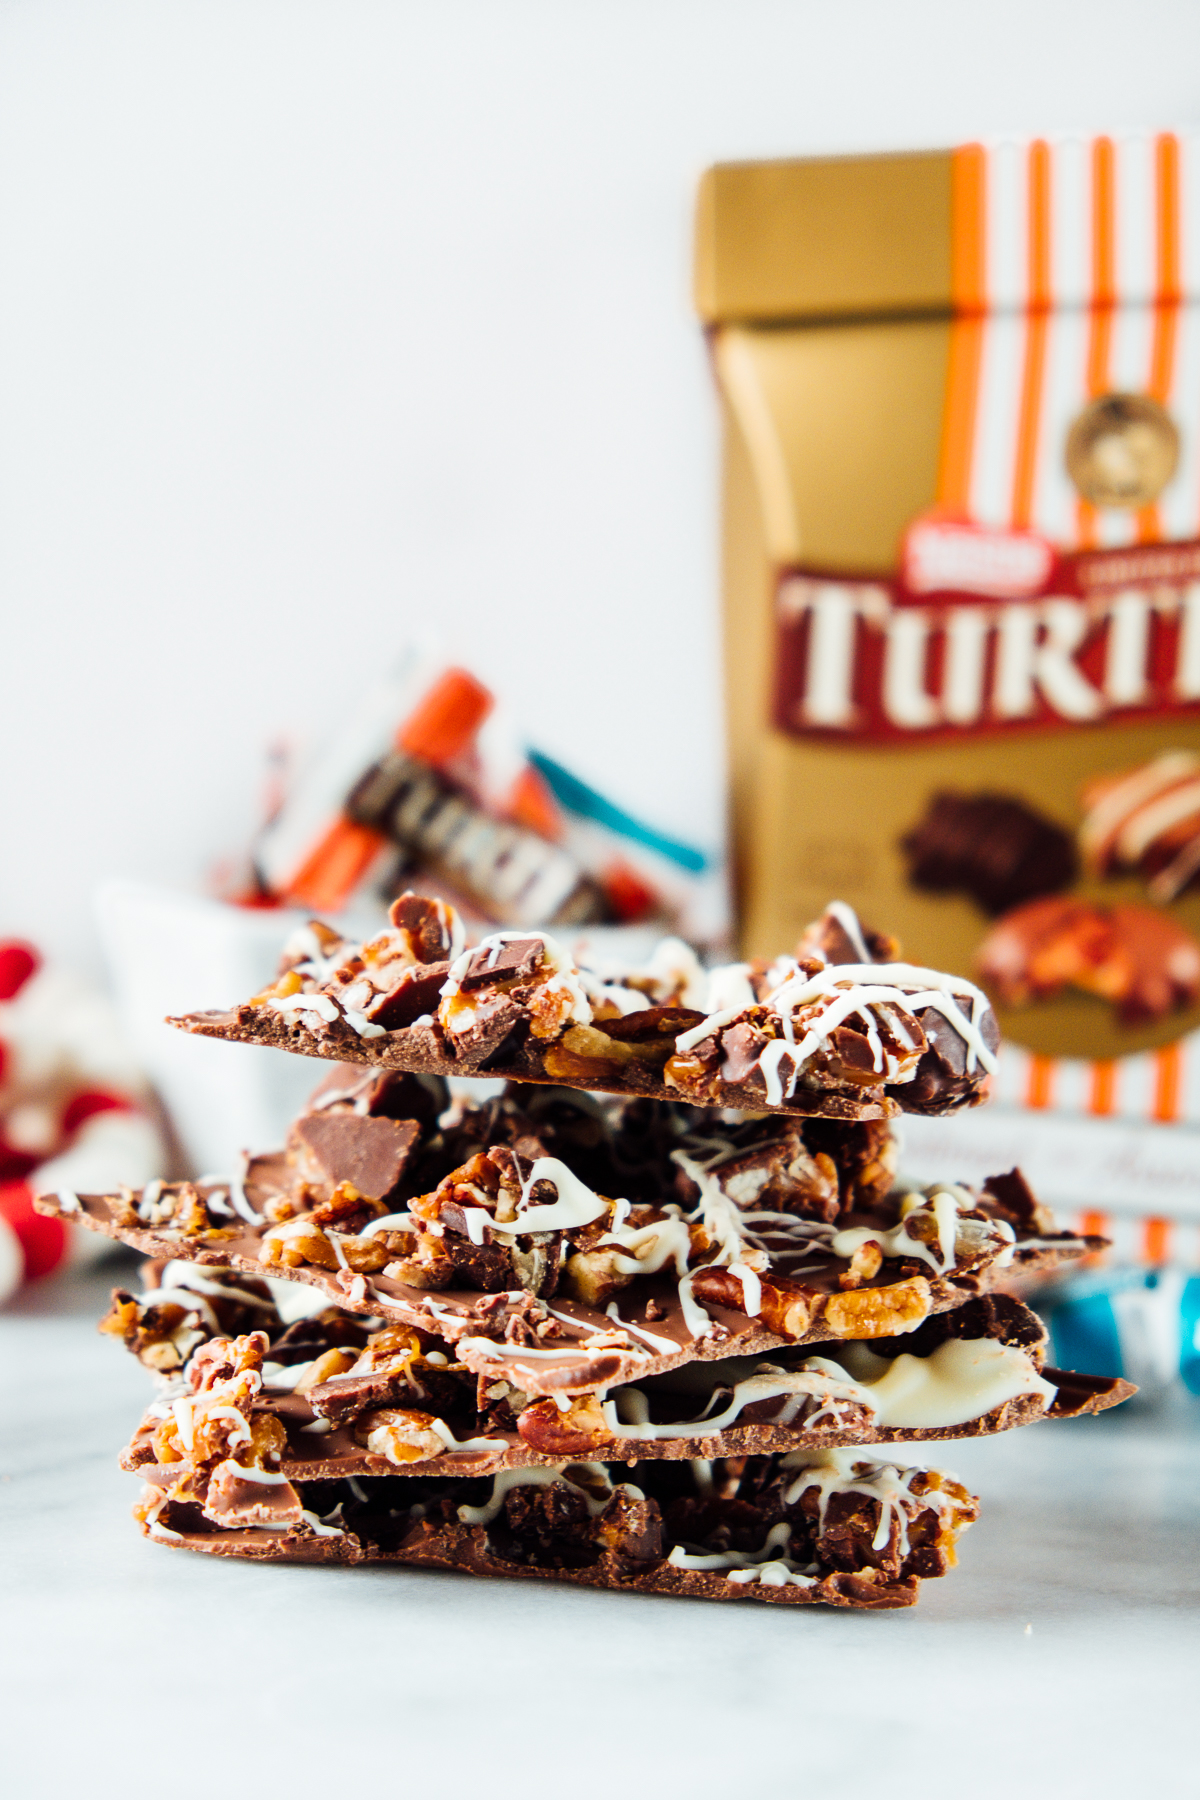 How to Make Chocolate Bark with TURTLES